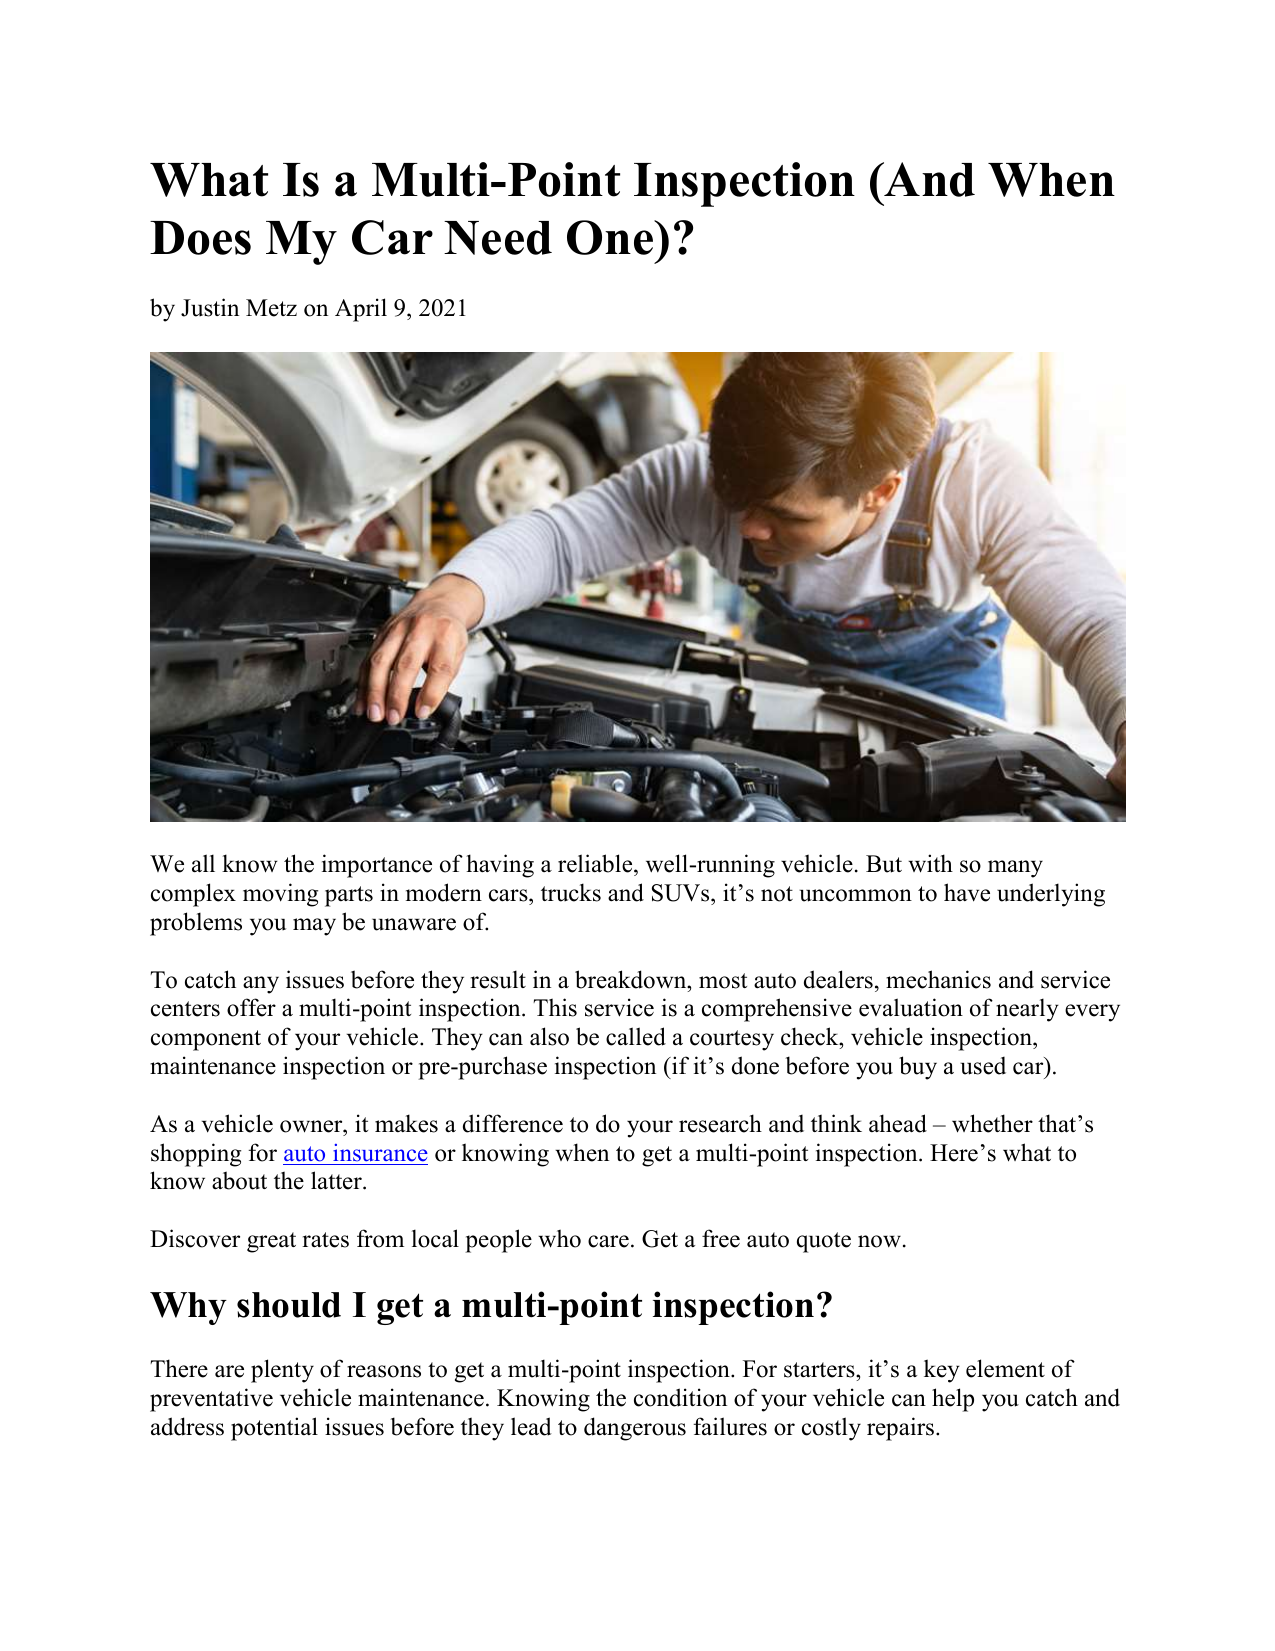 What Is a Multi-Point Inspection (And When Does My Car Need One)?